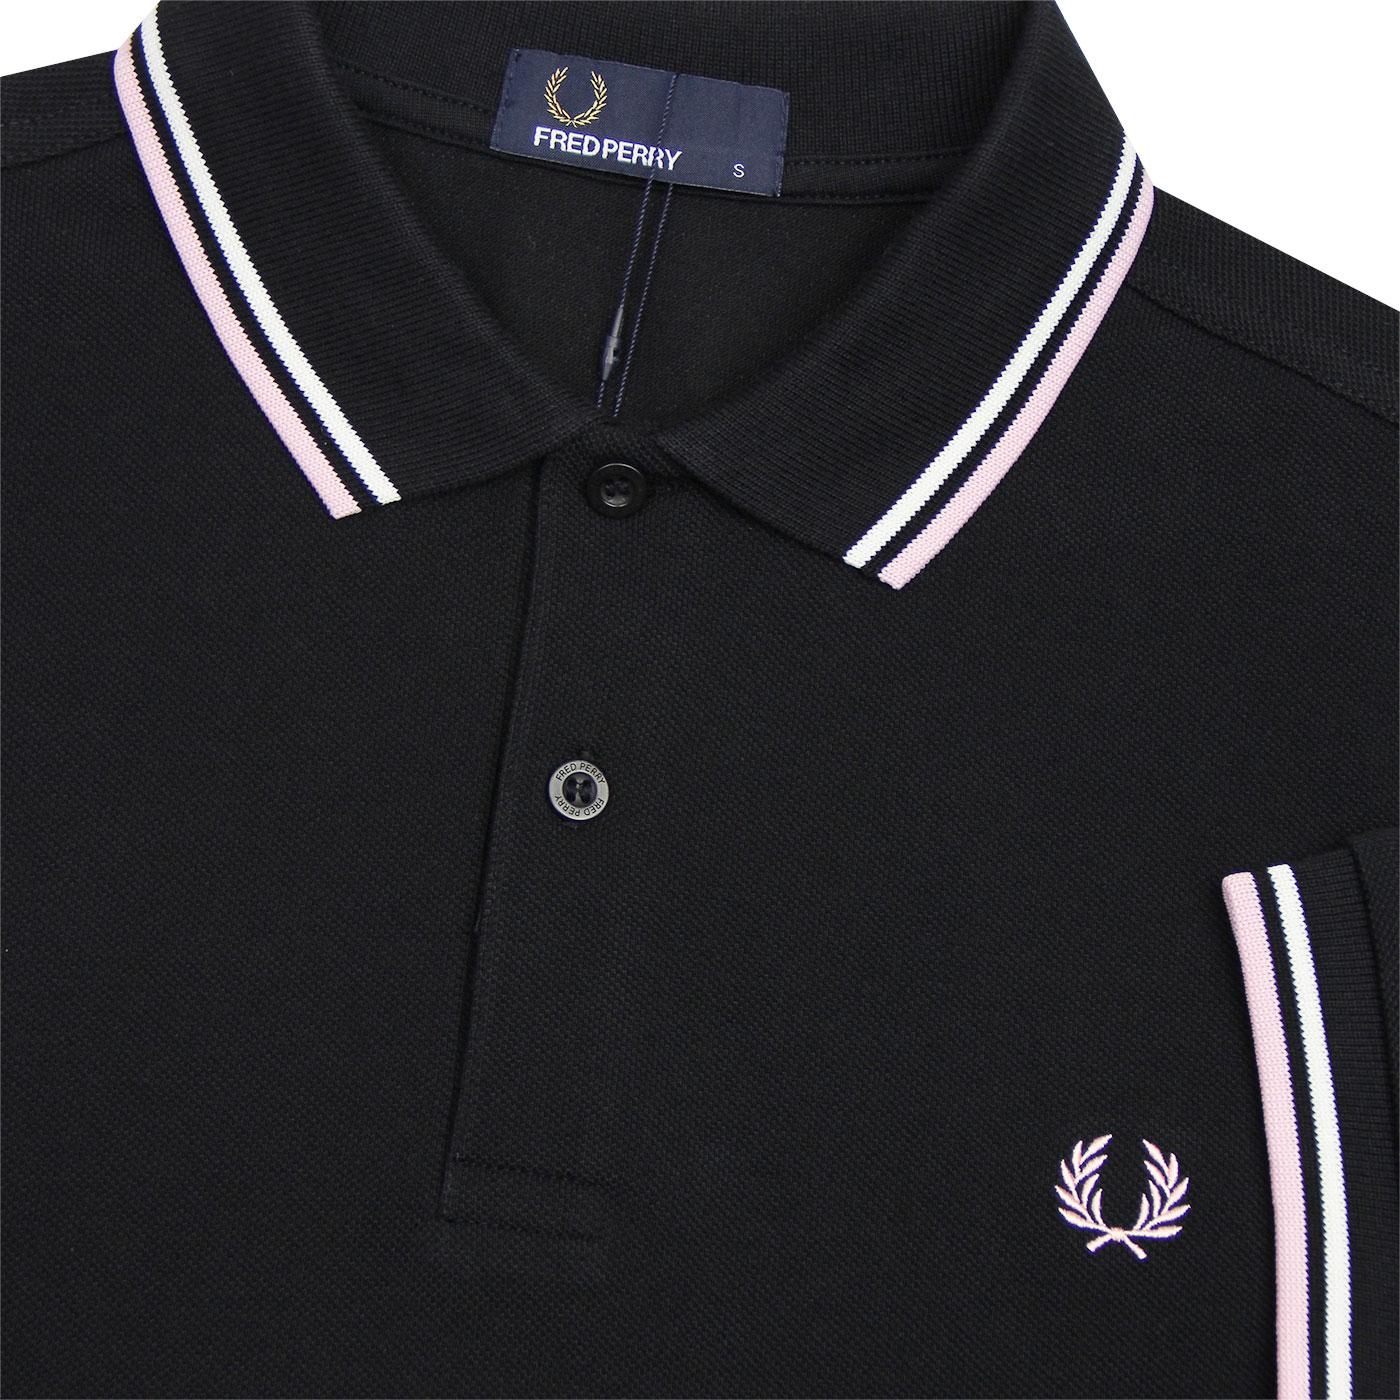 FRED PERRY M3600 Twin Tipped Mod Polo Shirt BLACK